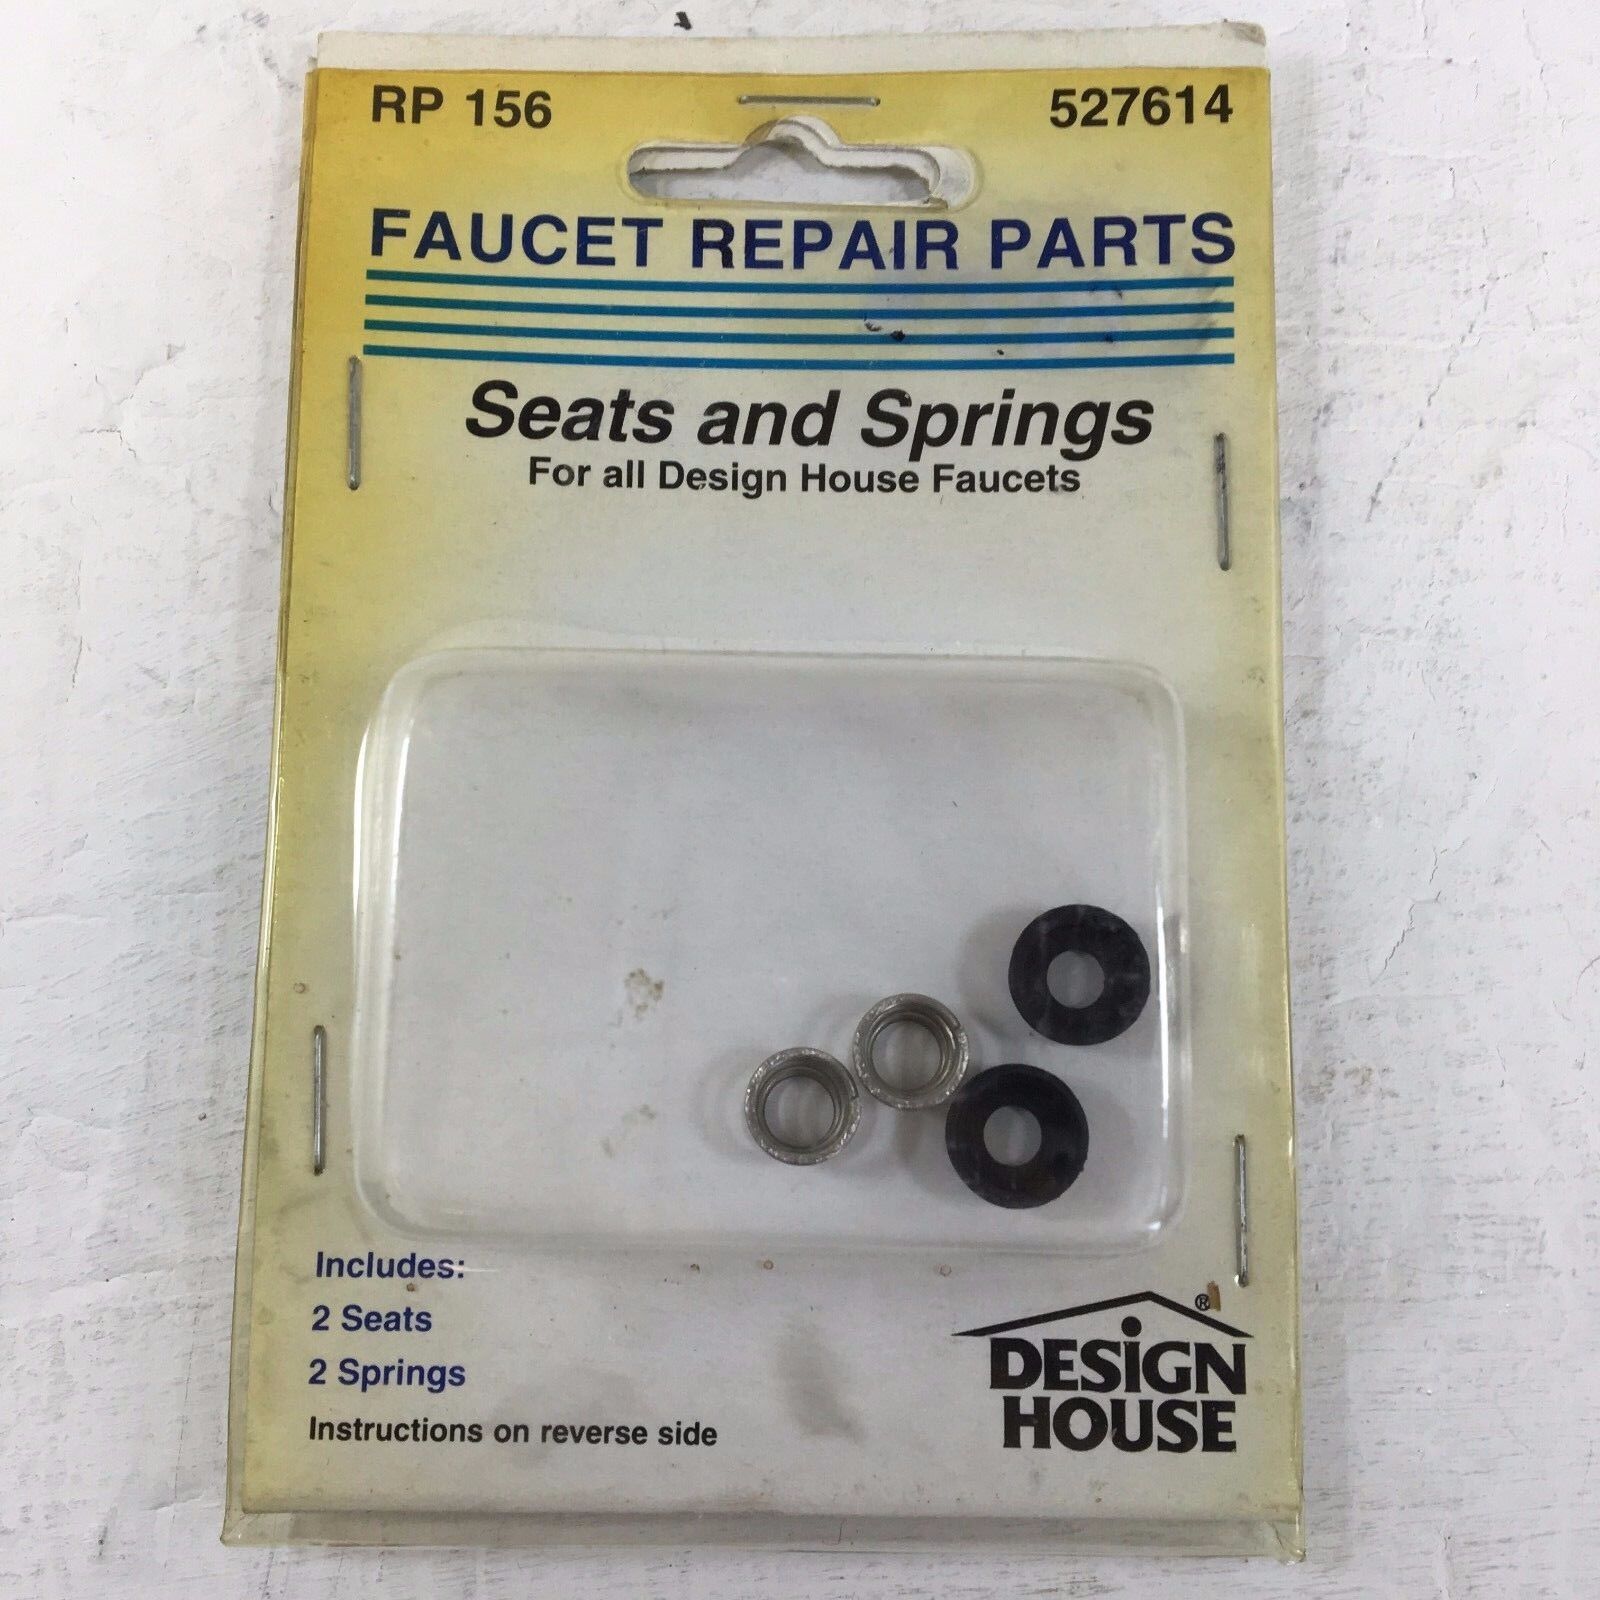 Design House Faucets Seat Spring Repair Parts RP 156 527614 EBay